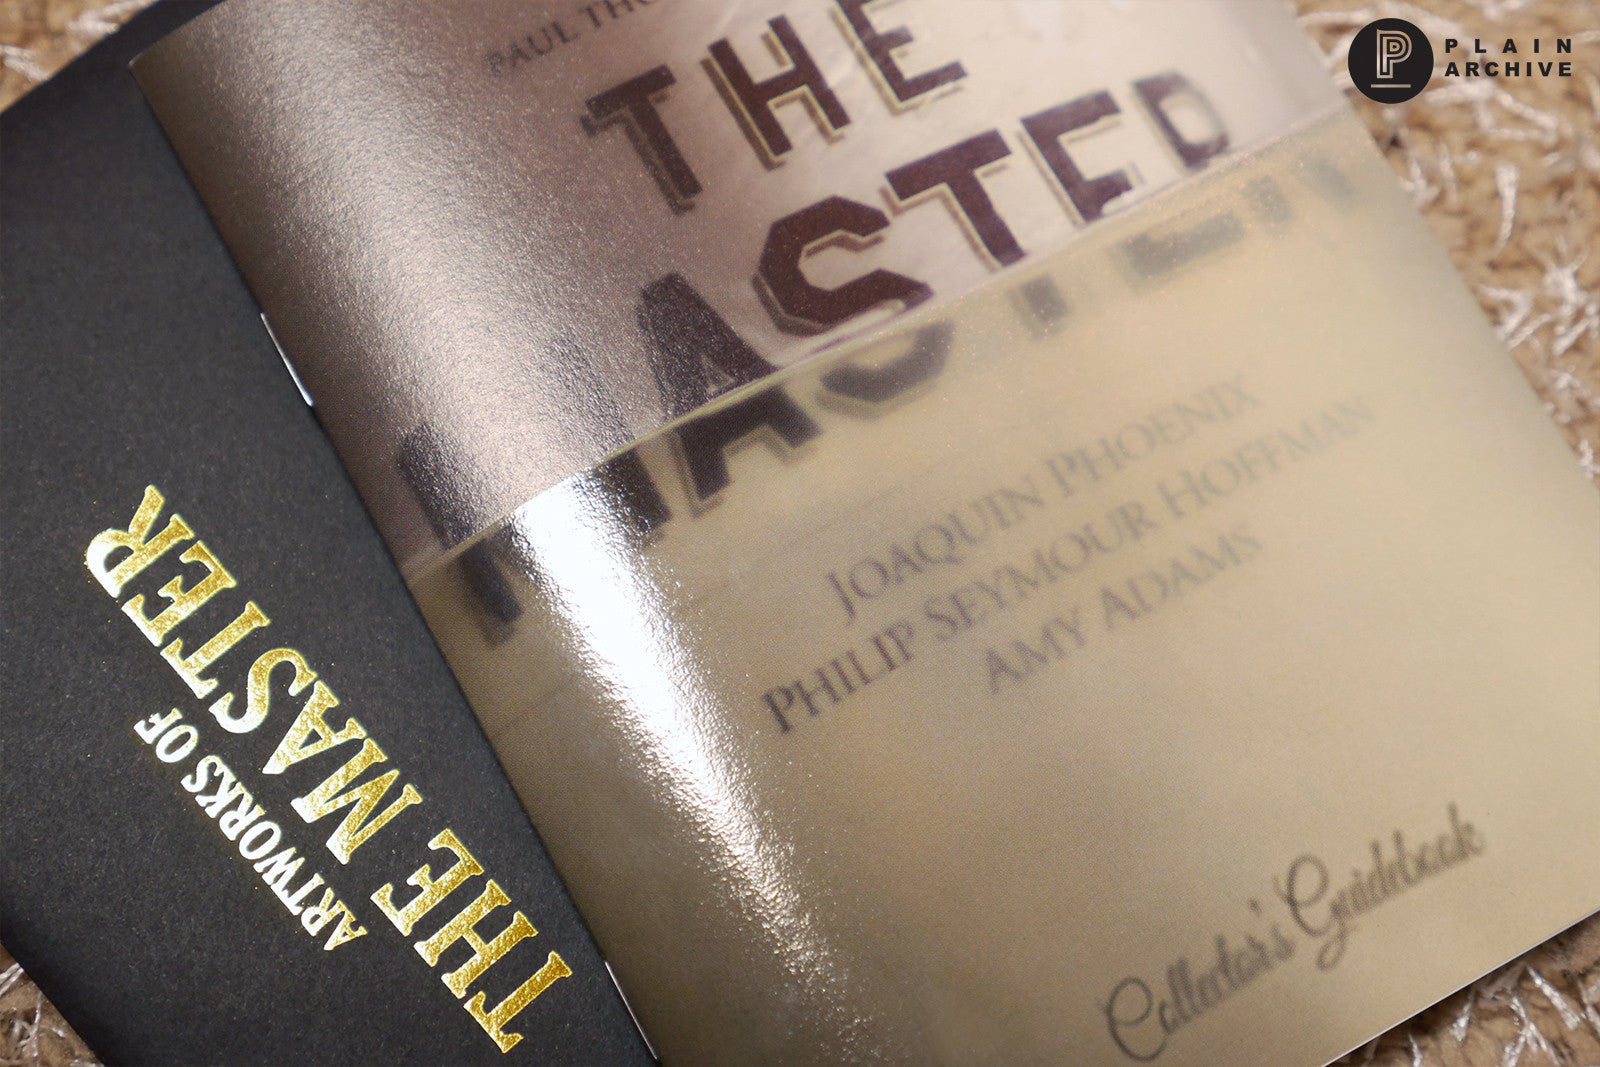 THE MASTER Steelbook with 1/4 Slip (Hologram & Gold foil finish)